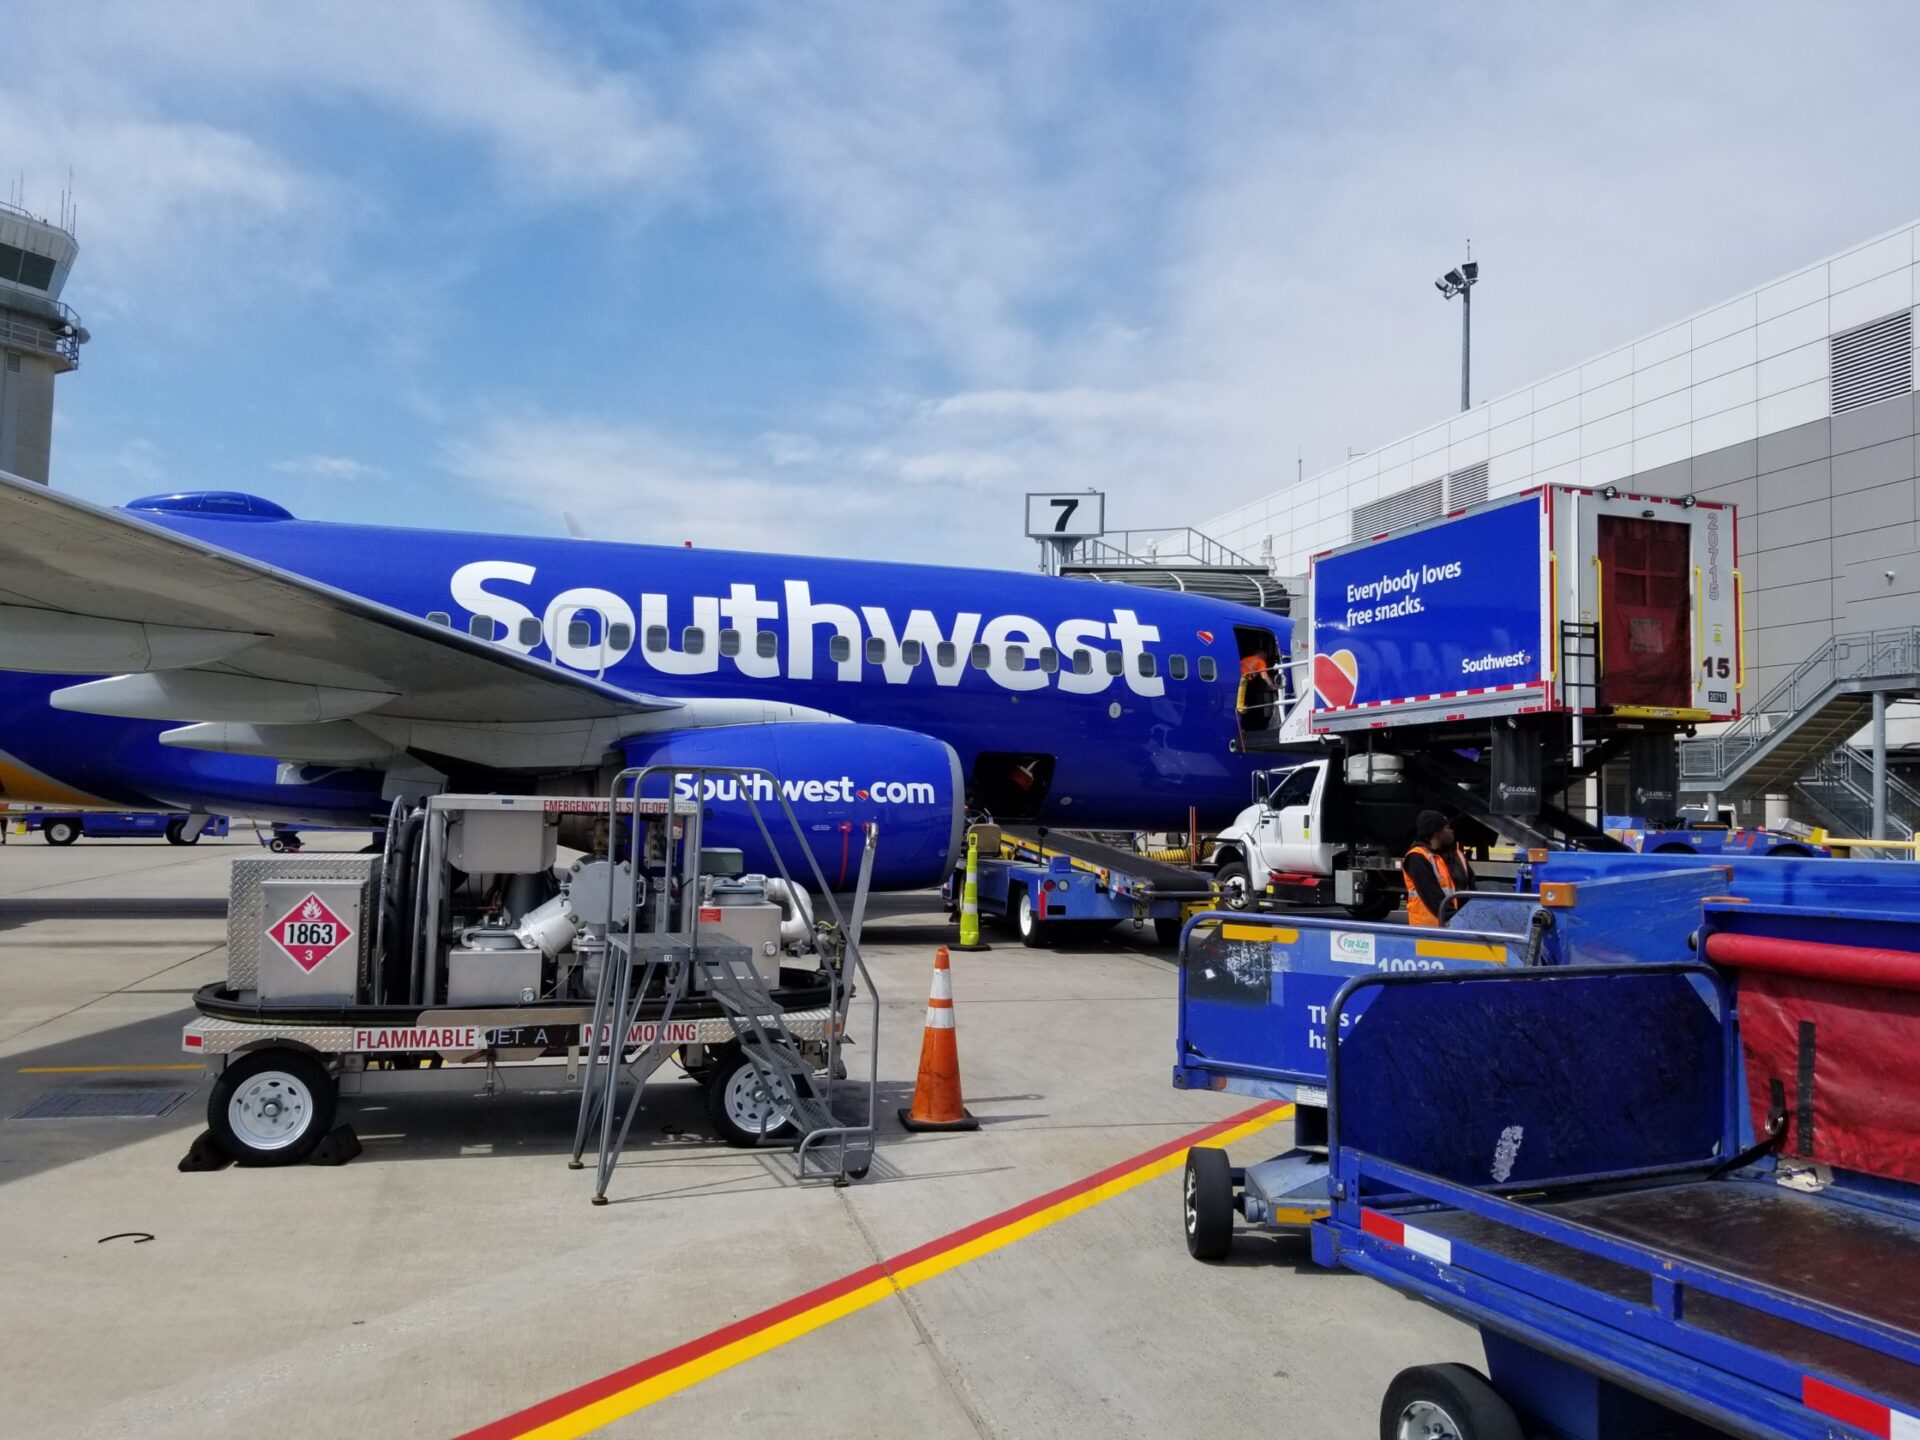 Ground vehicles assist with loading cargo onto a Southwest plane